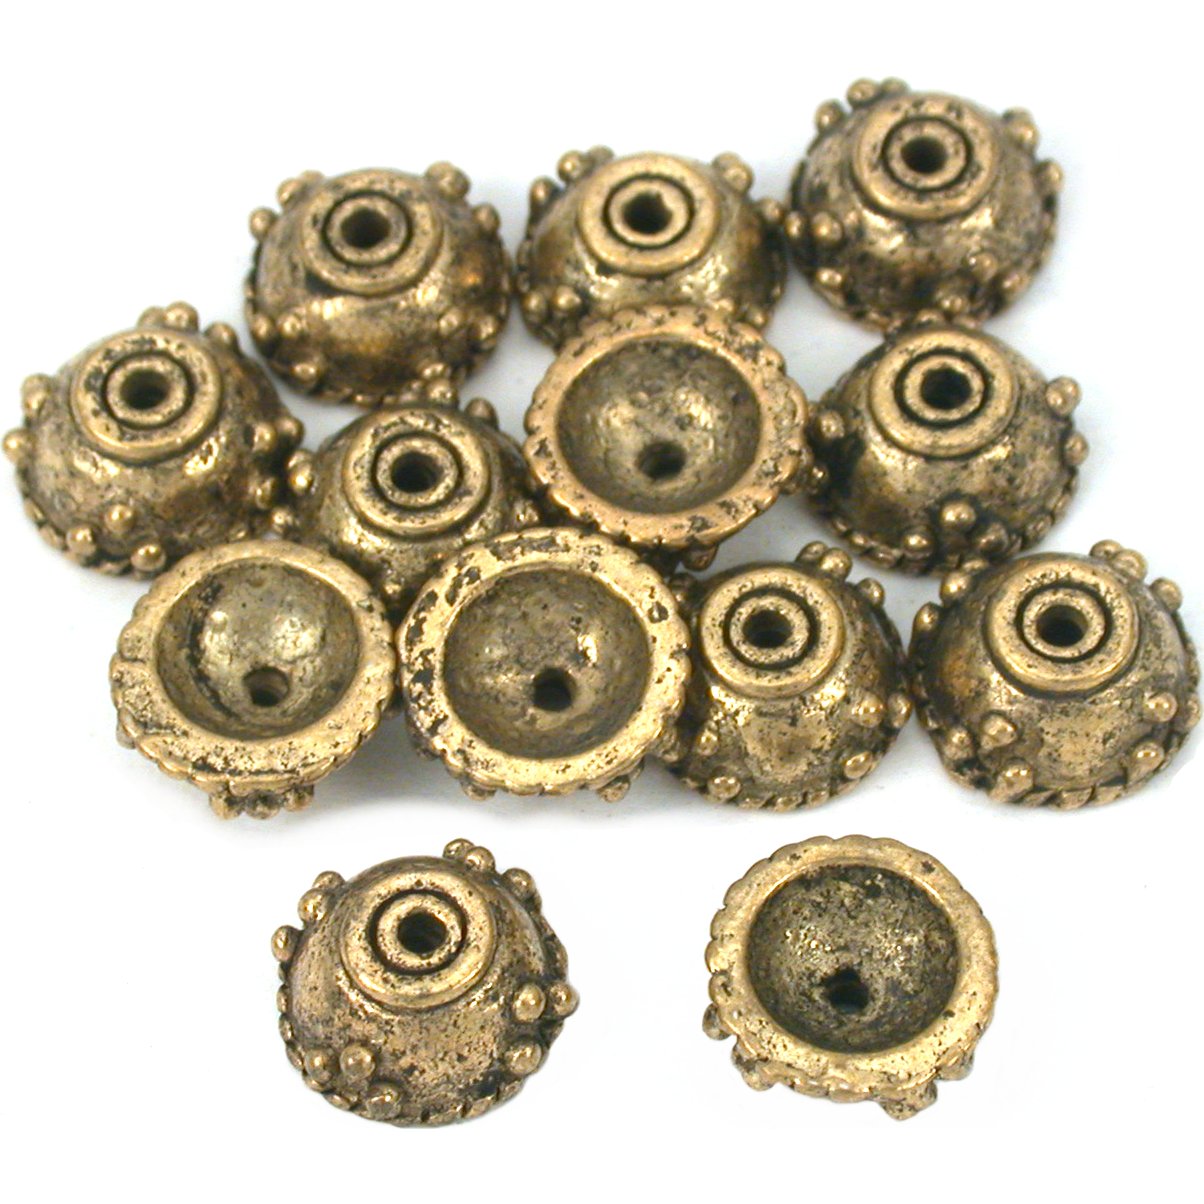 Bali Bead Caps Rope Antique Gold Plated 9.5mm 12Pcs Approx.